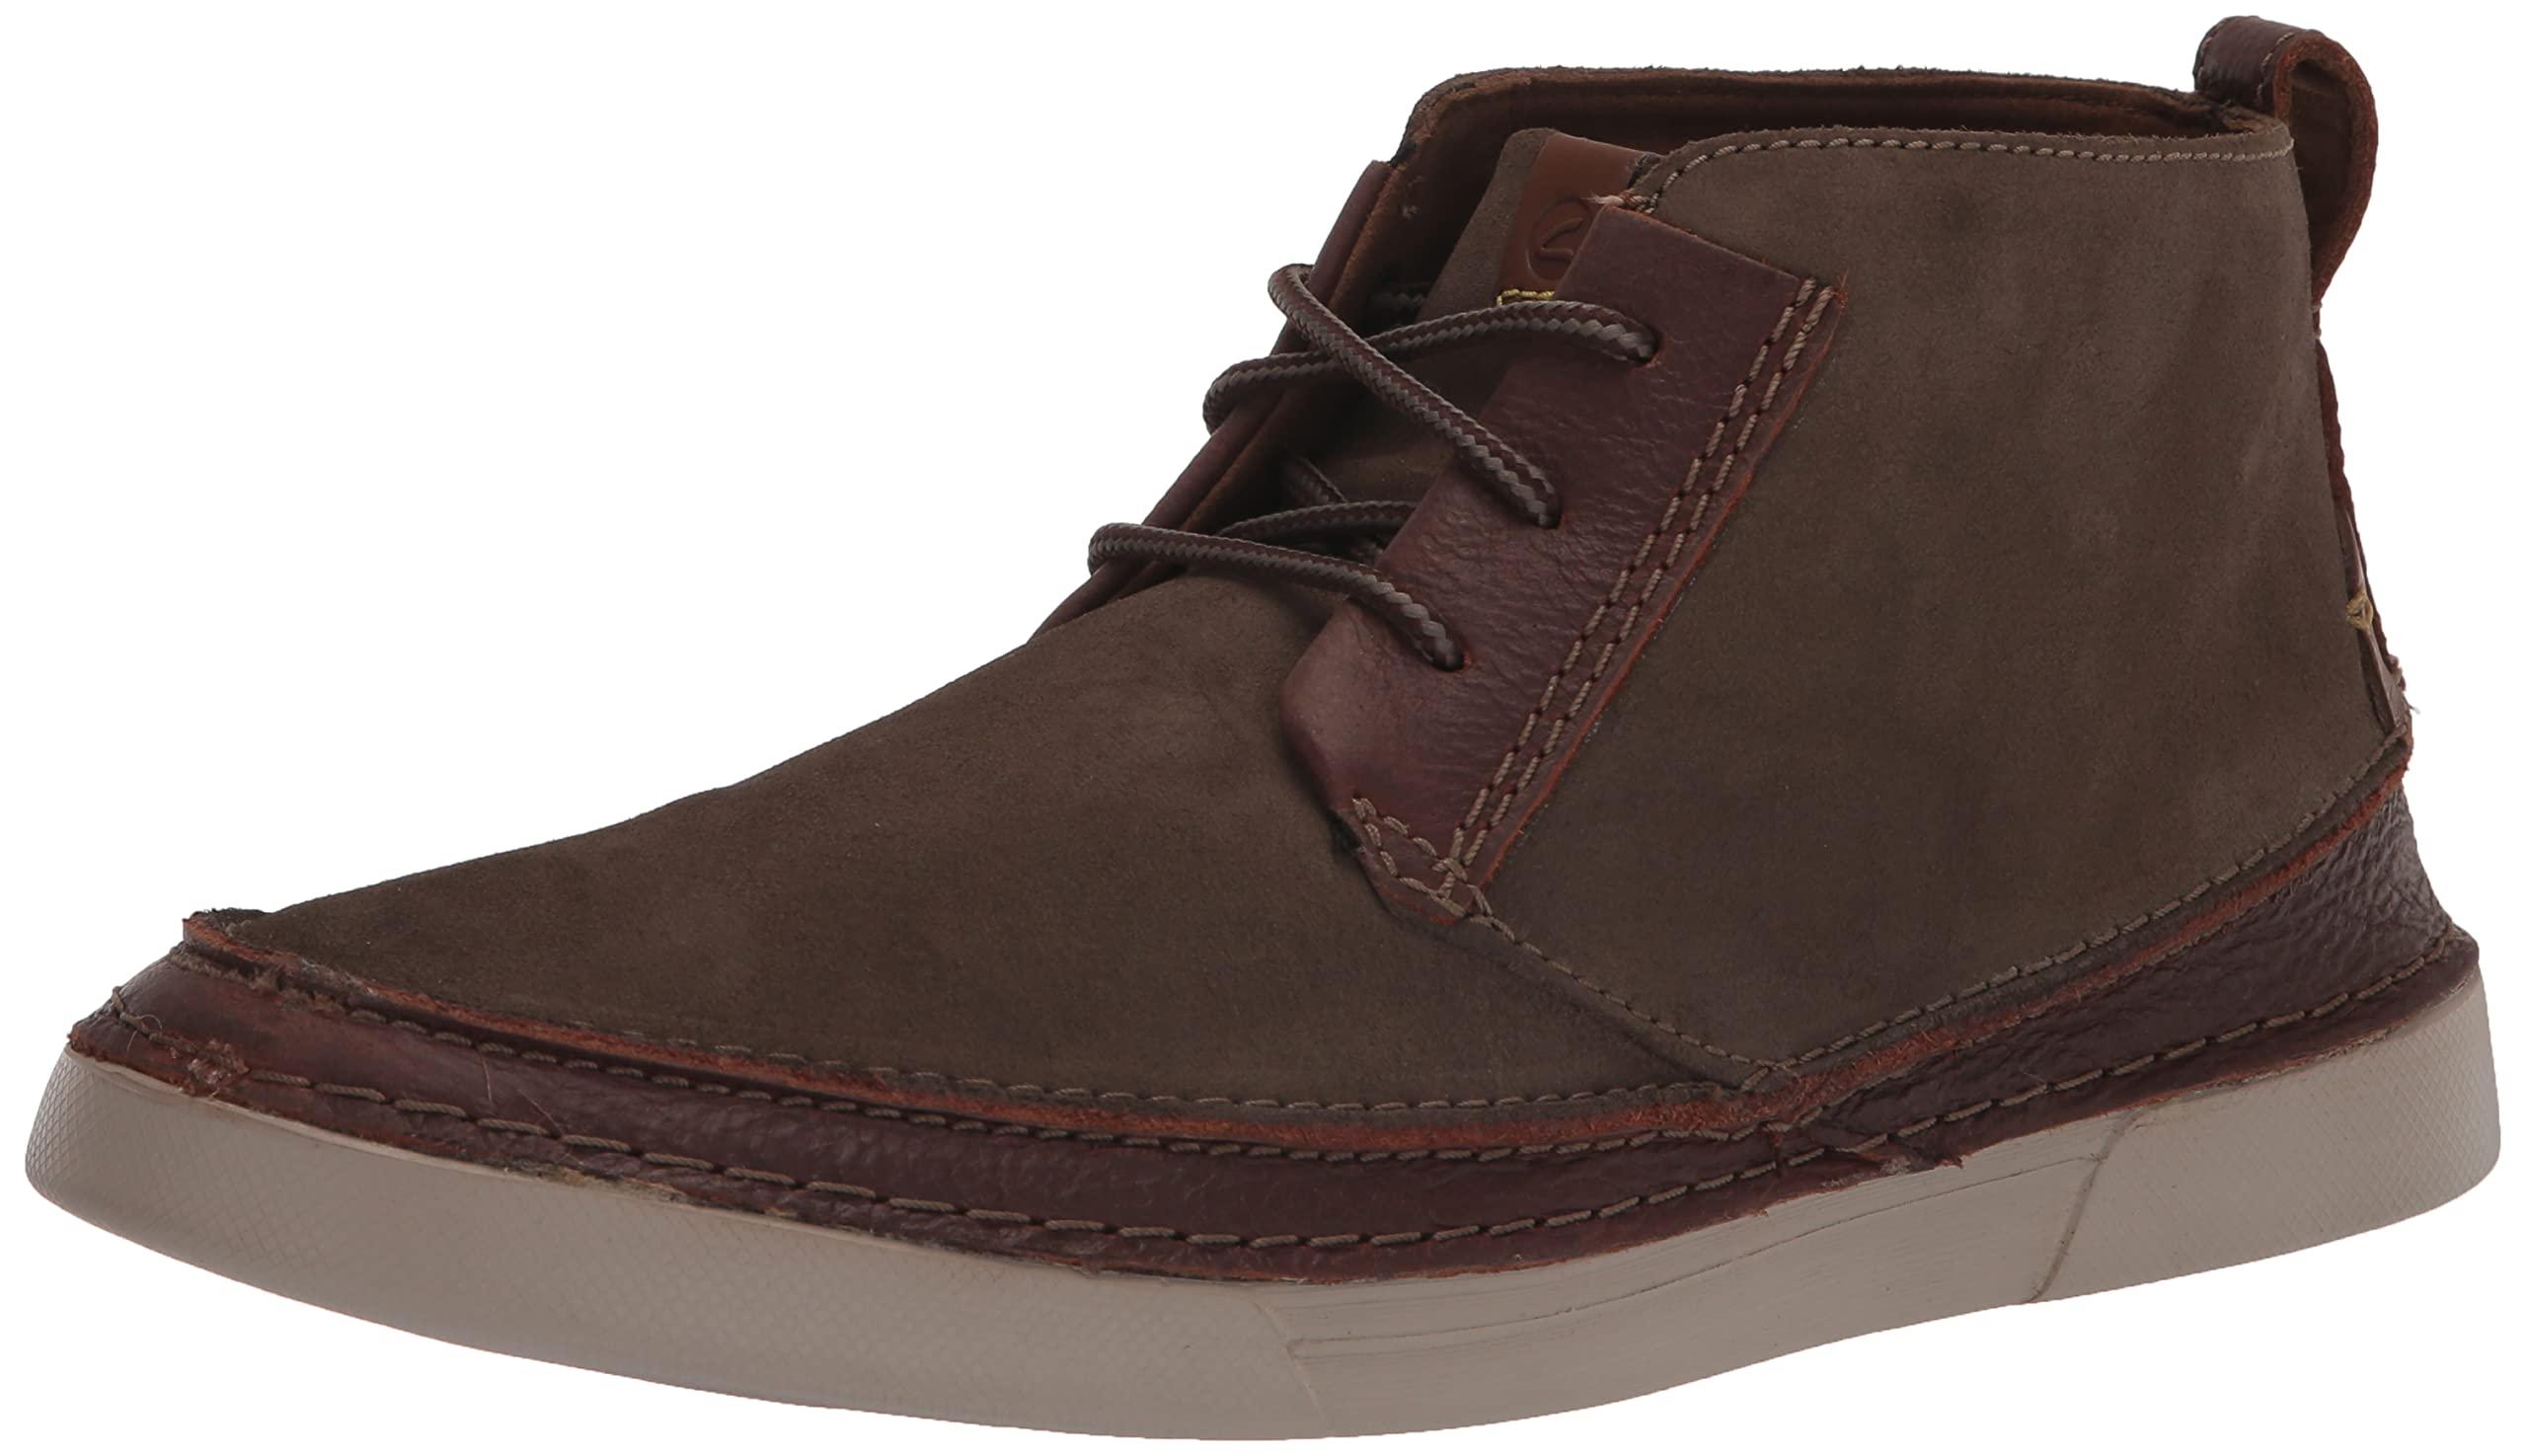 Clarks Gereld Mid Ankle Boot in Brown for Men | Lyst